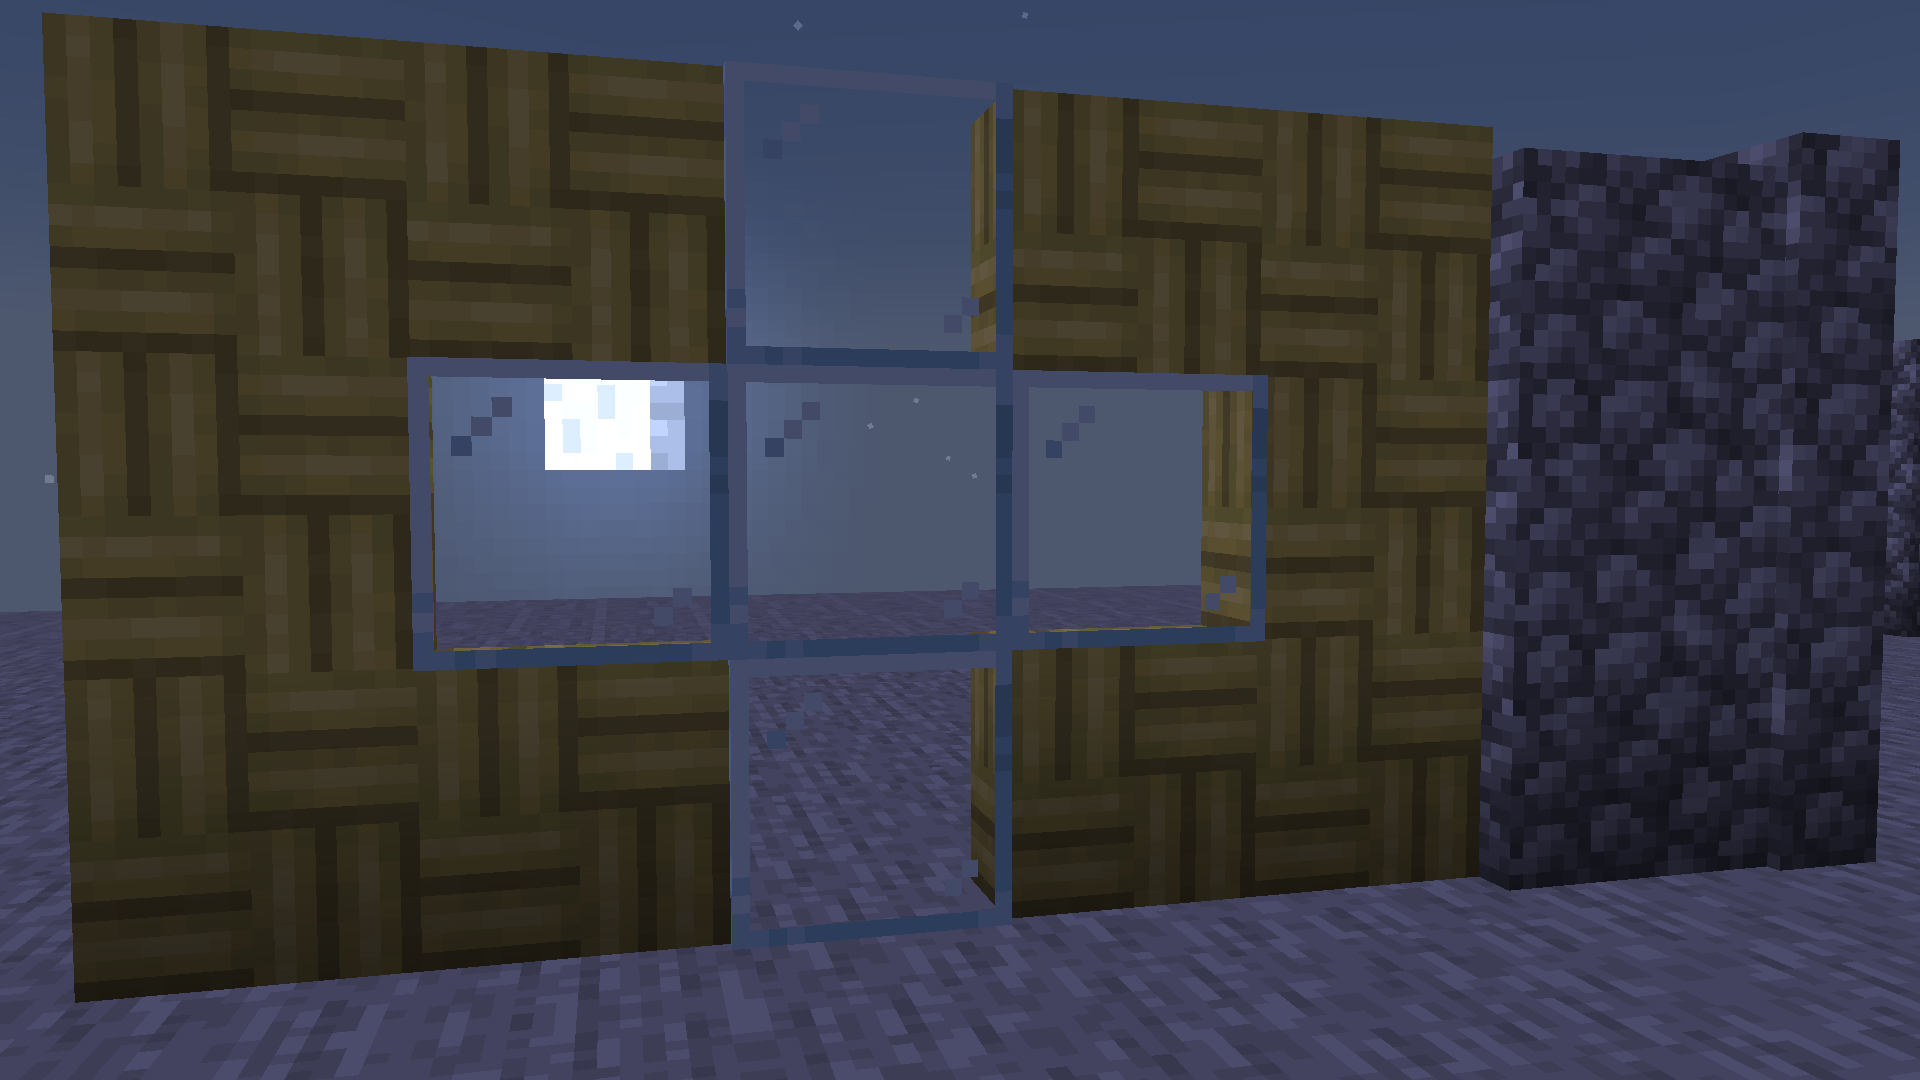 Glass Panes and Walls connecting to Vertical Slabs